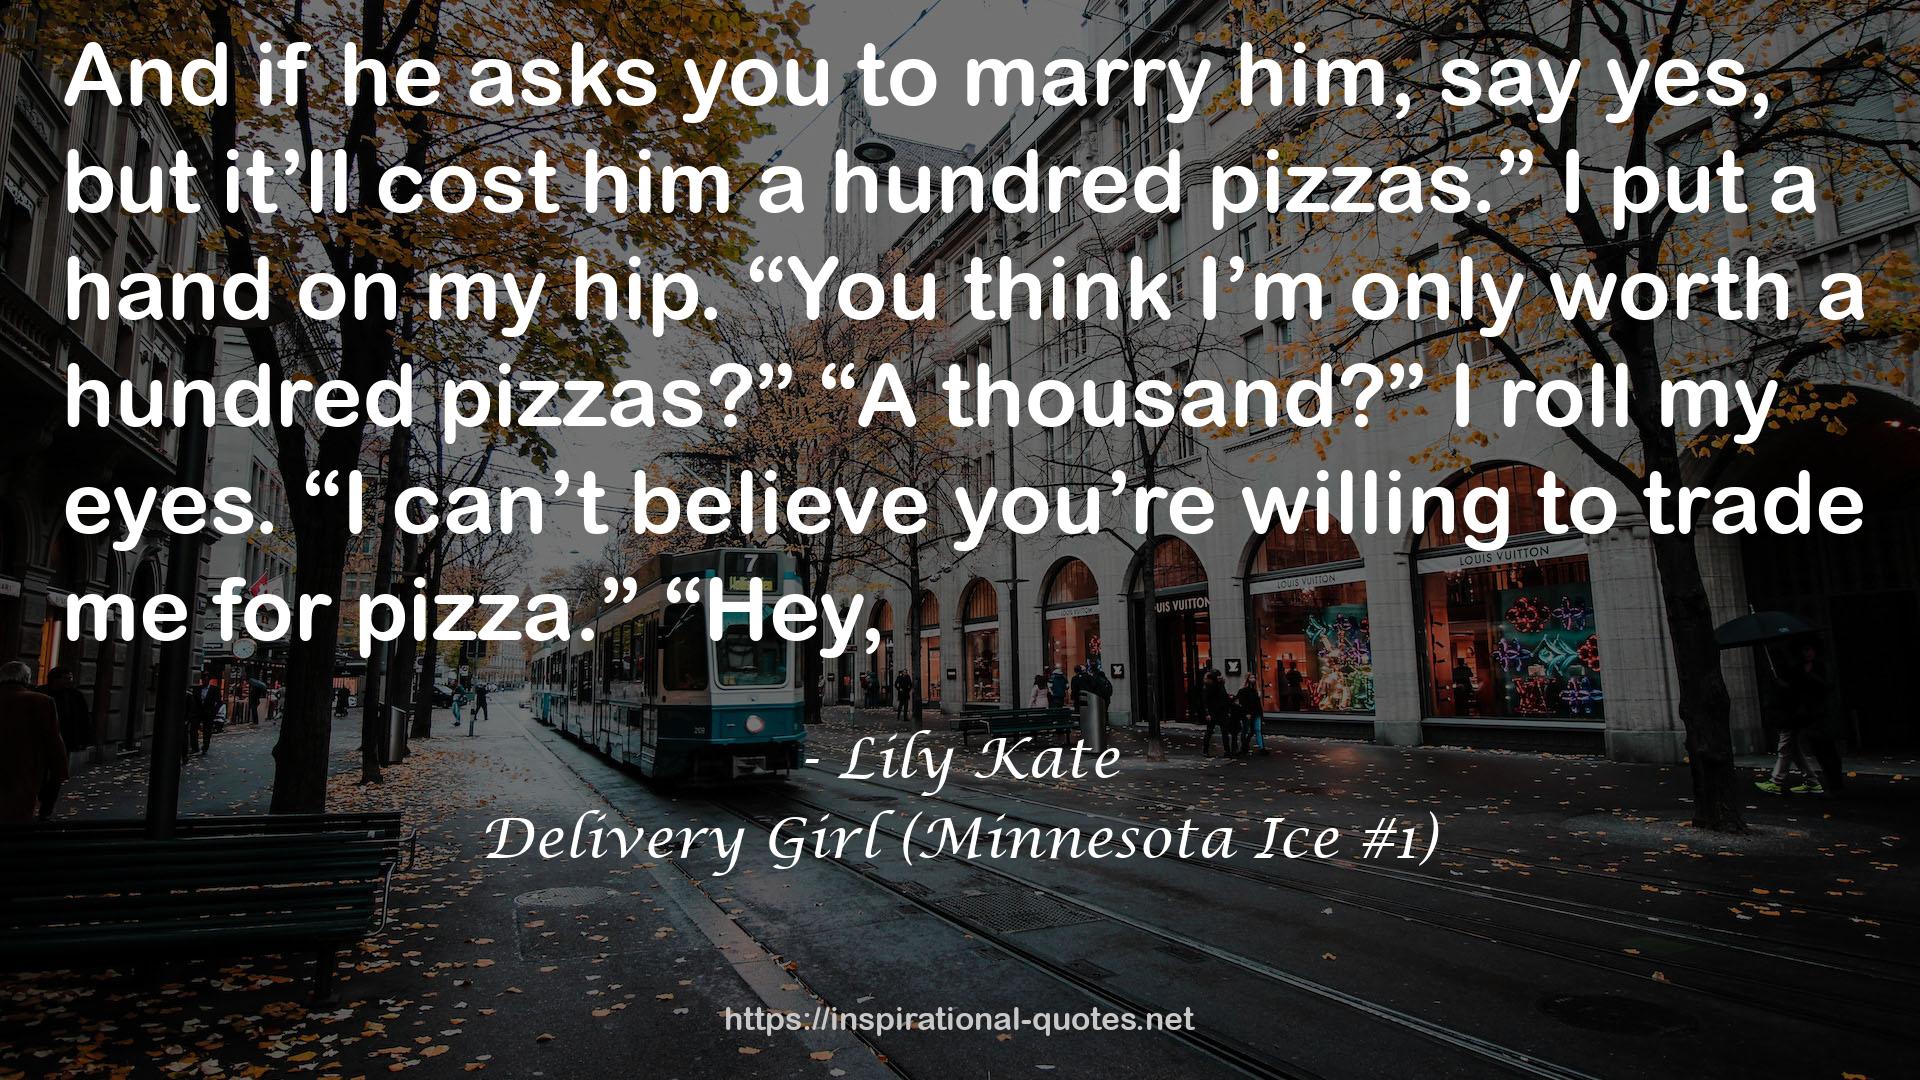 Delivery Girl (Minnesota Ice #1) QUOTES